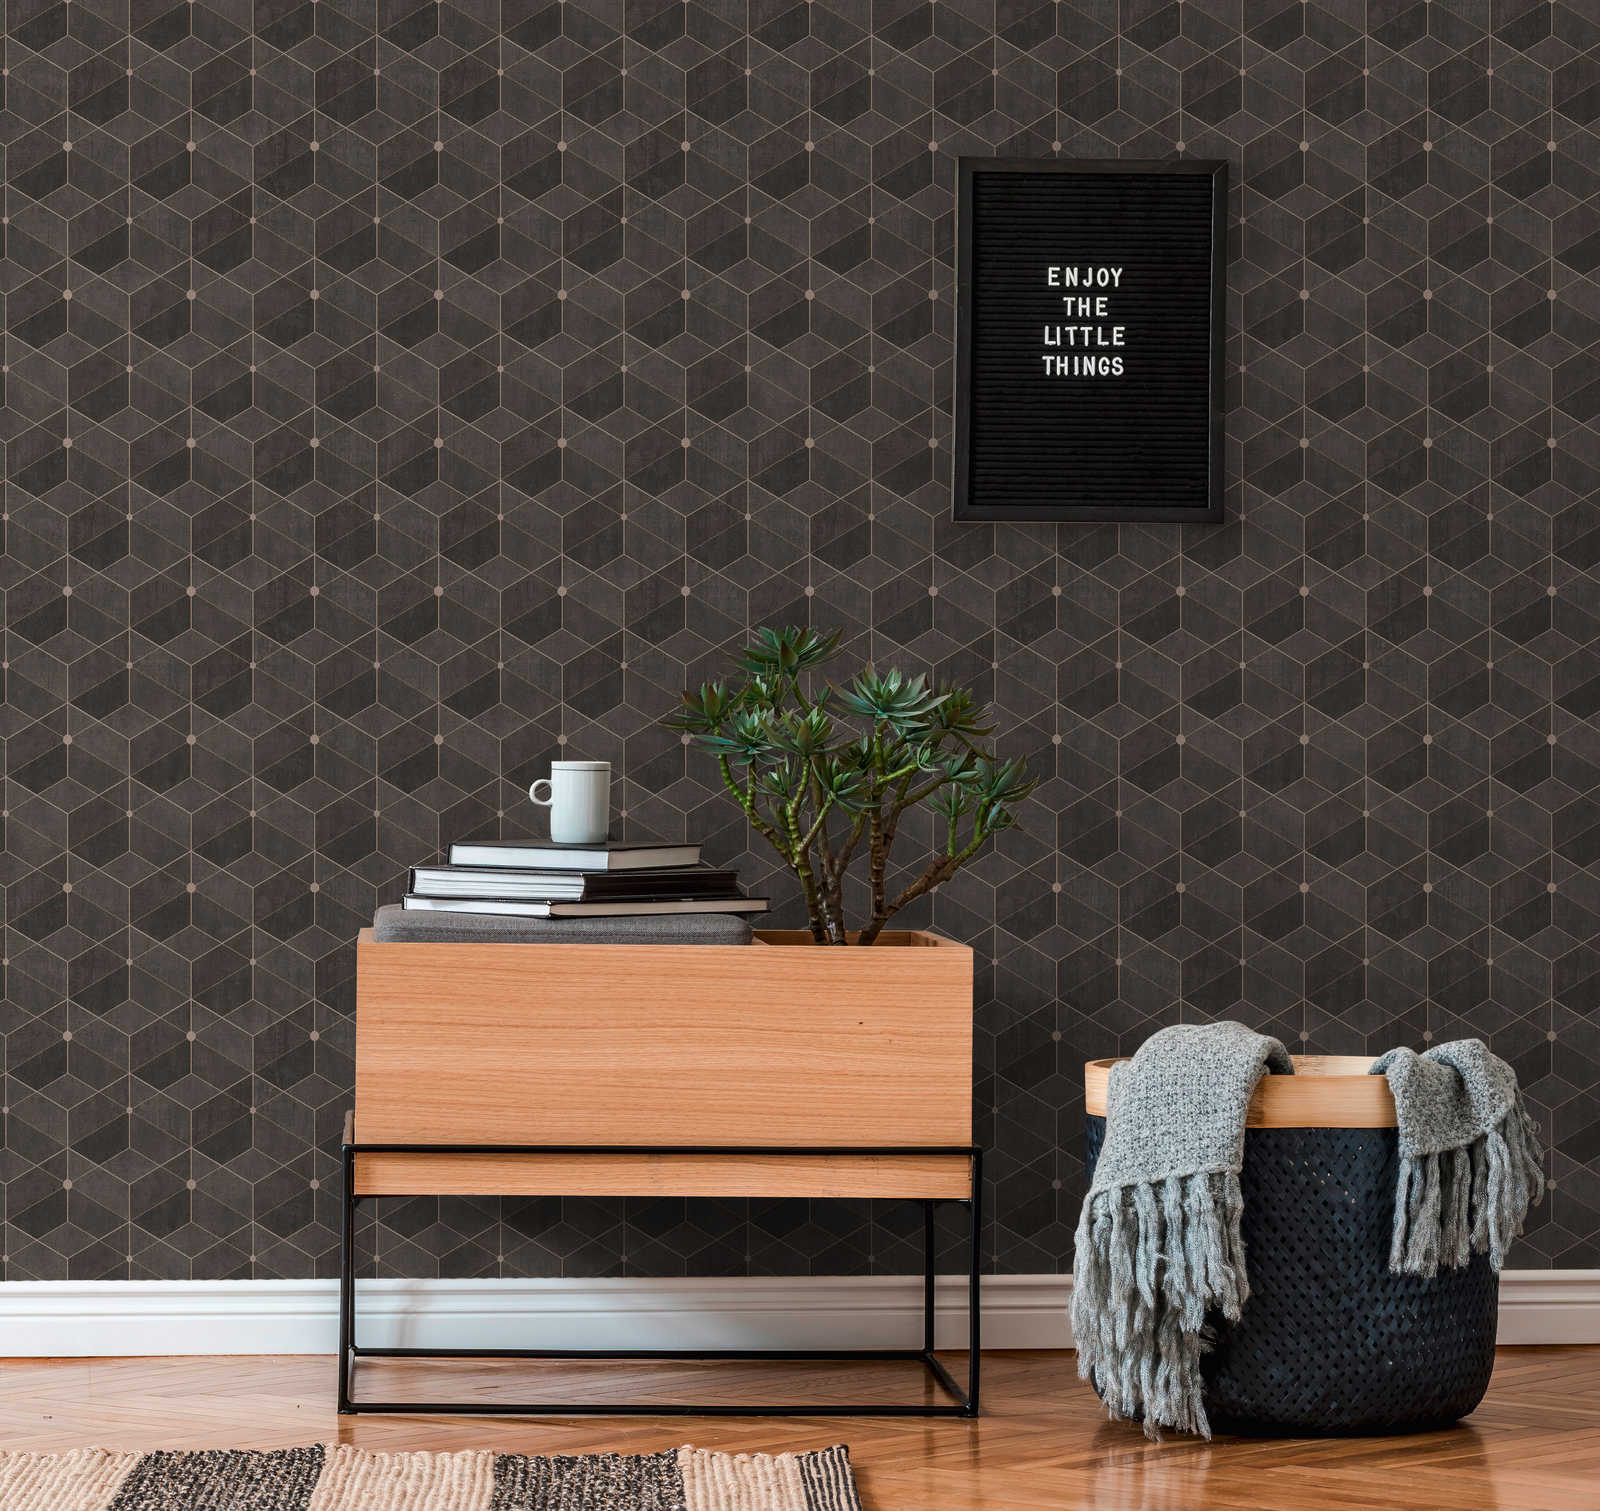             Retro wallpaper with graphic pattern & metallic accent - brown
        